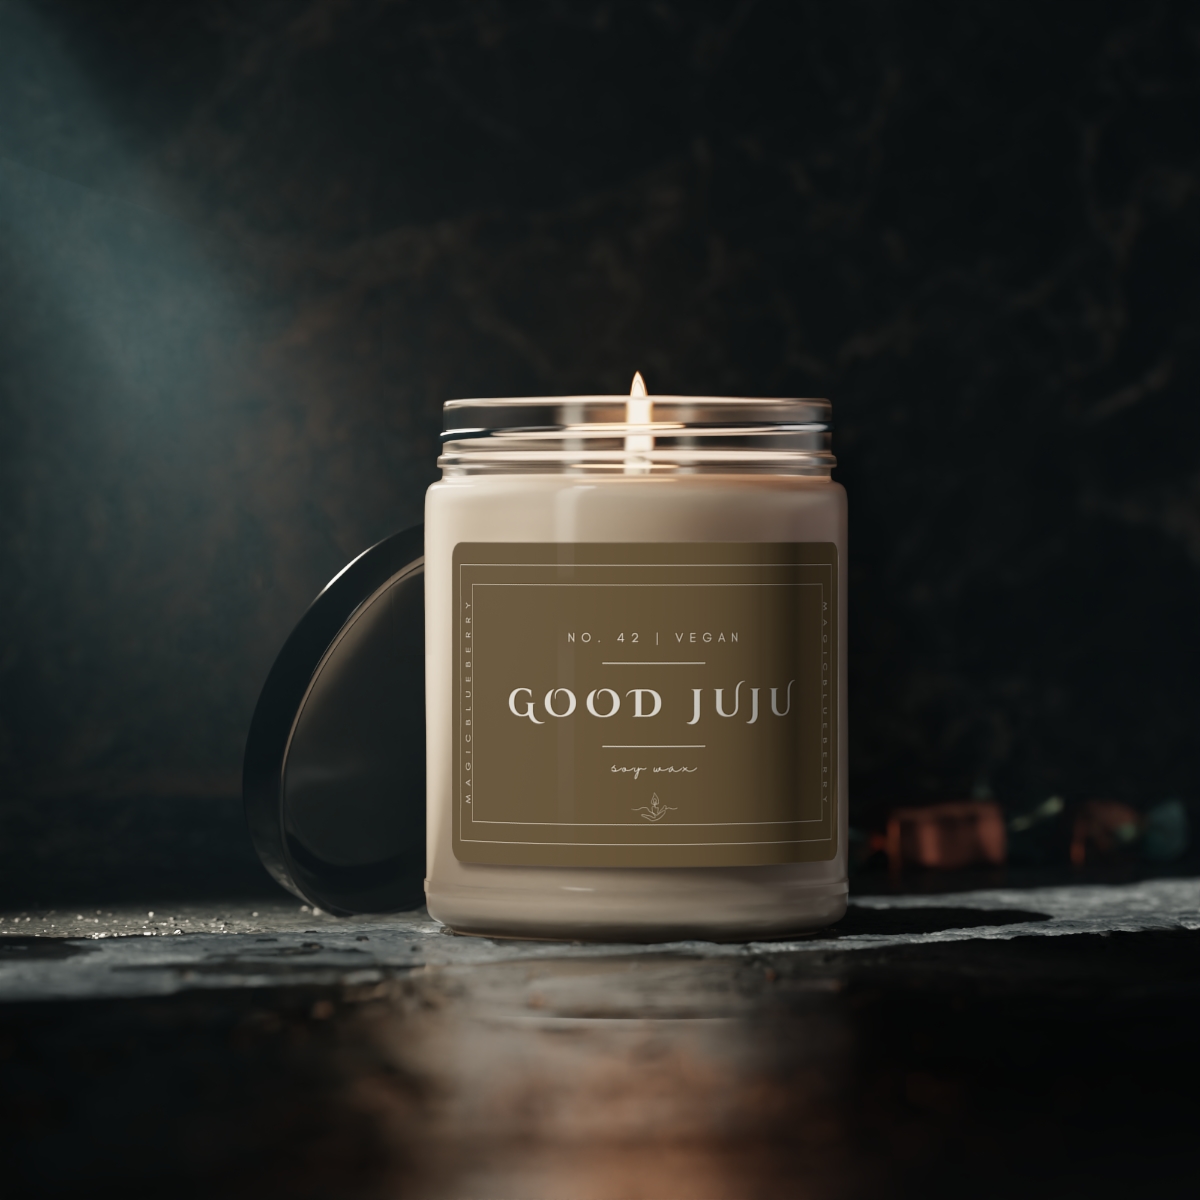 Good Juju, Scented Vegan Soy Wax Candles, Clear Jar Candle, Spell Candles, Sassy Candle, Vegan Candle, Cotton Wick Candle, Home Decor Candle product thumbnail image